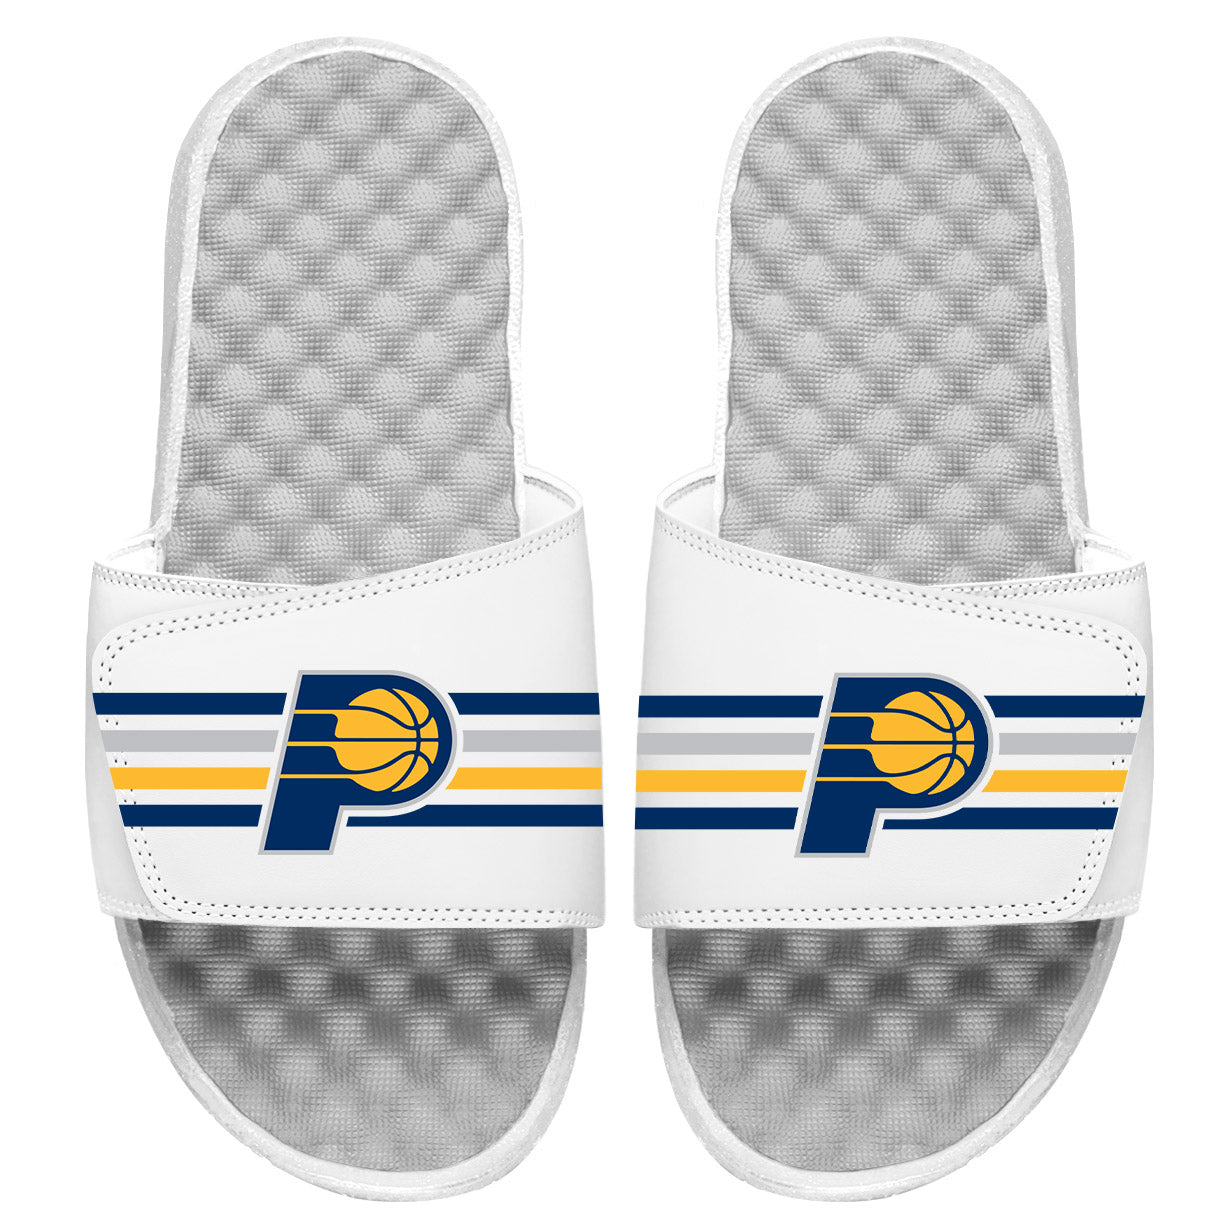 Indiana Pacers Stripes Slides